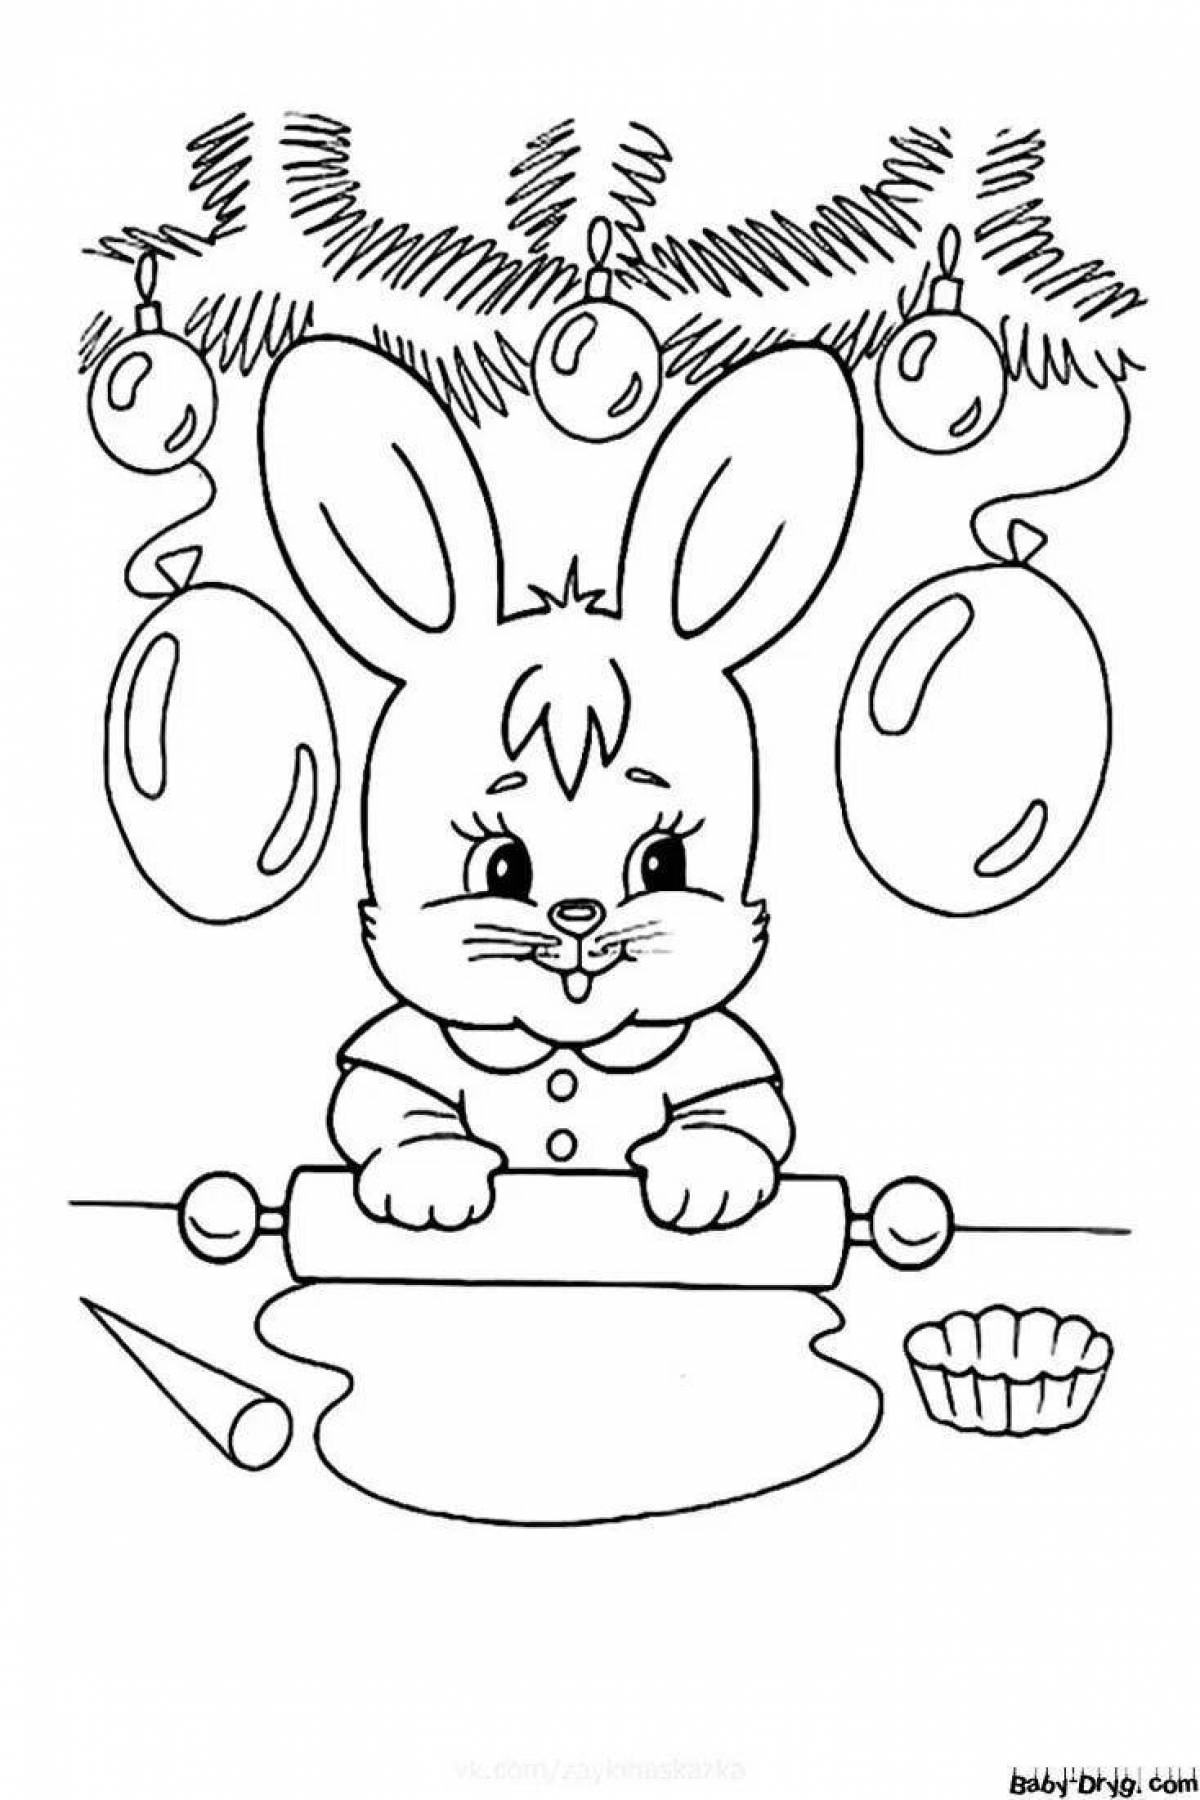 Coloring book beckoning hare and tree